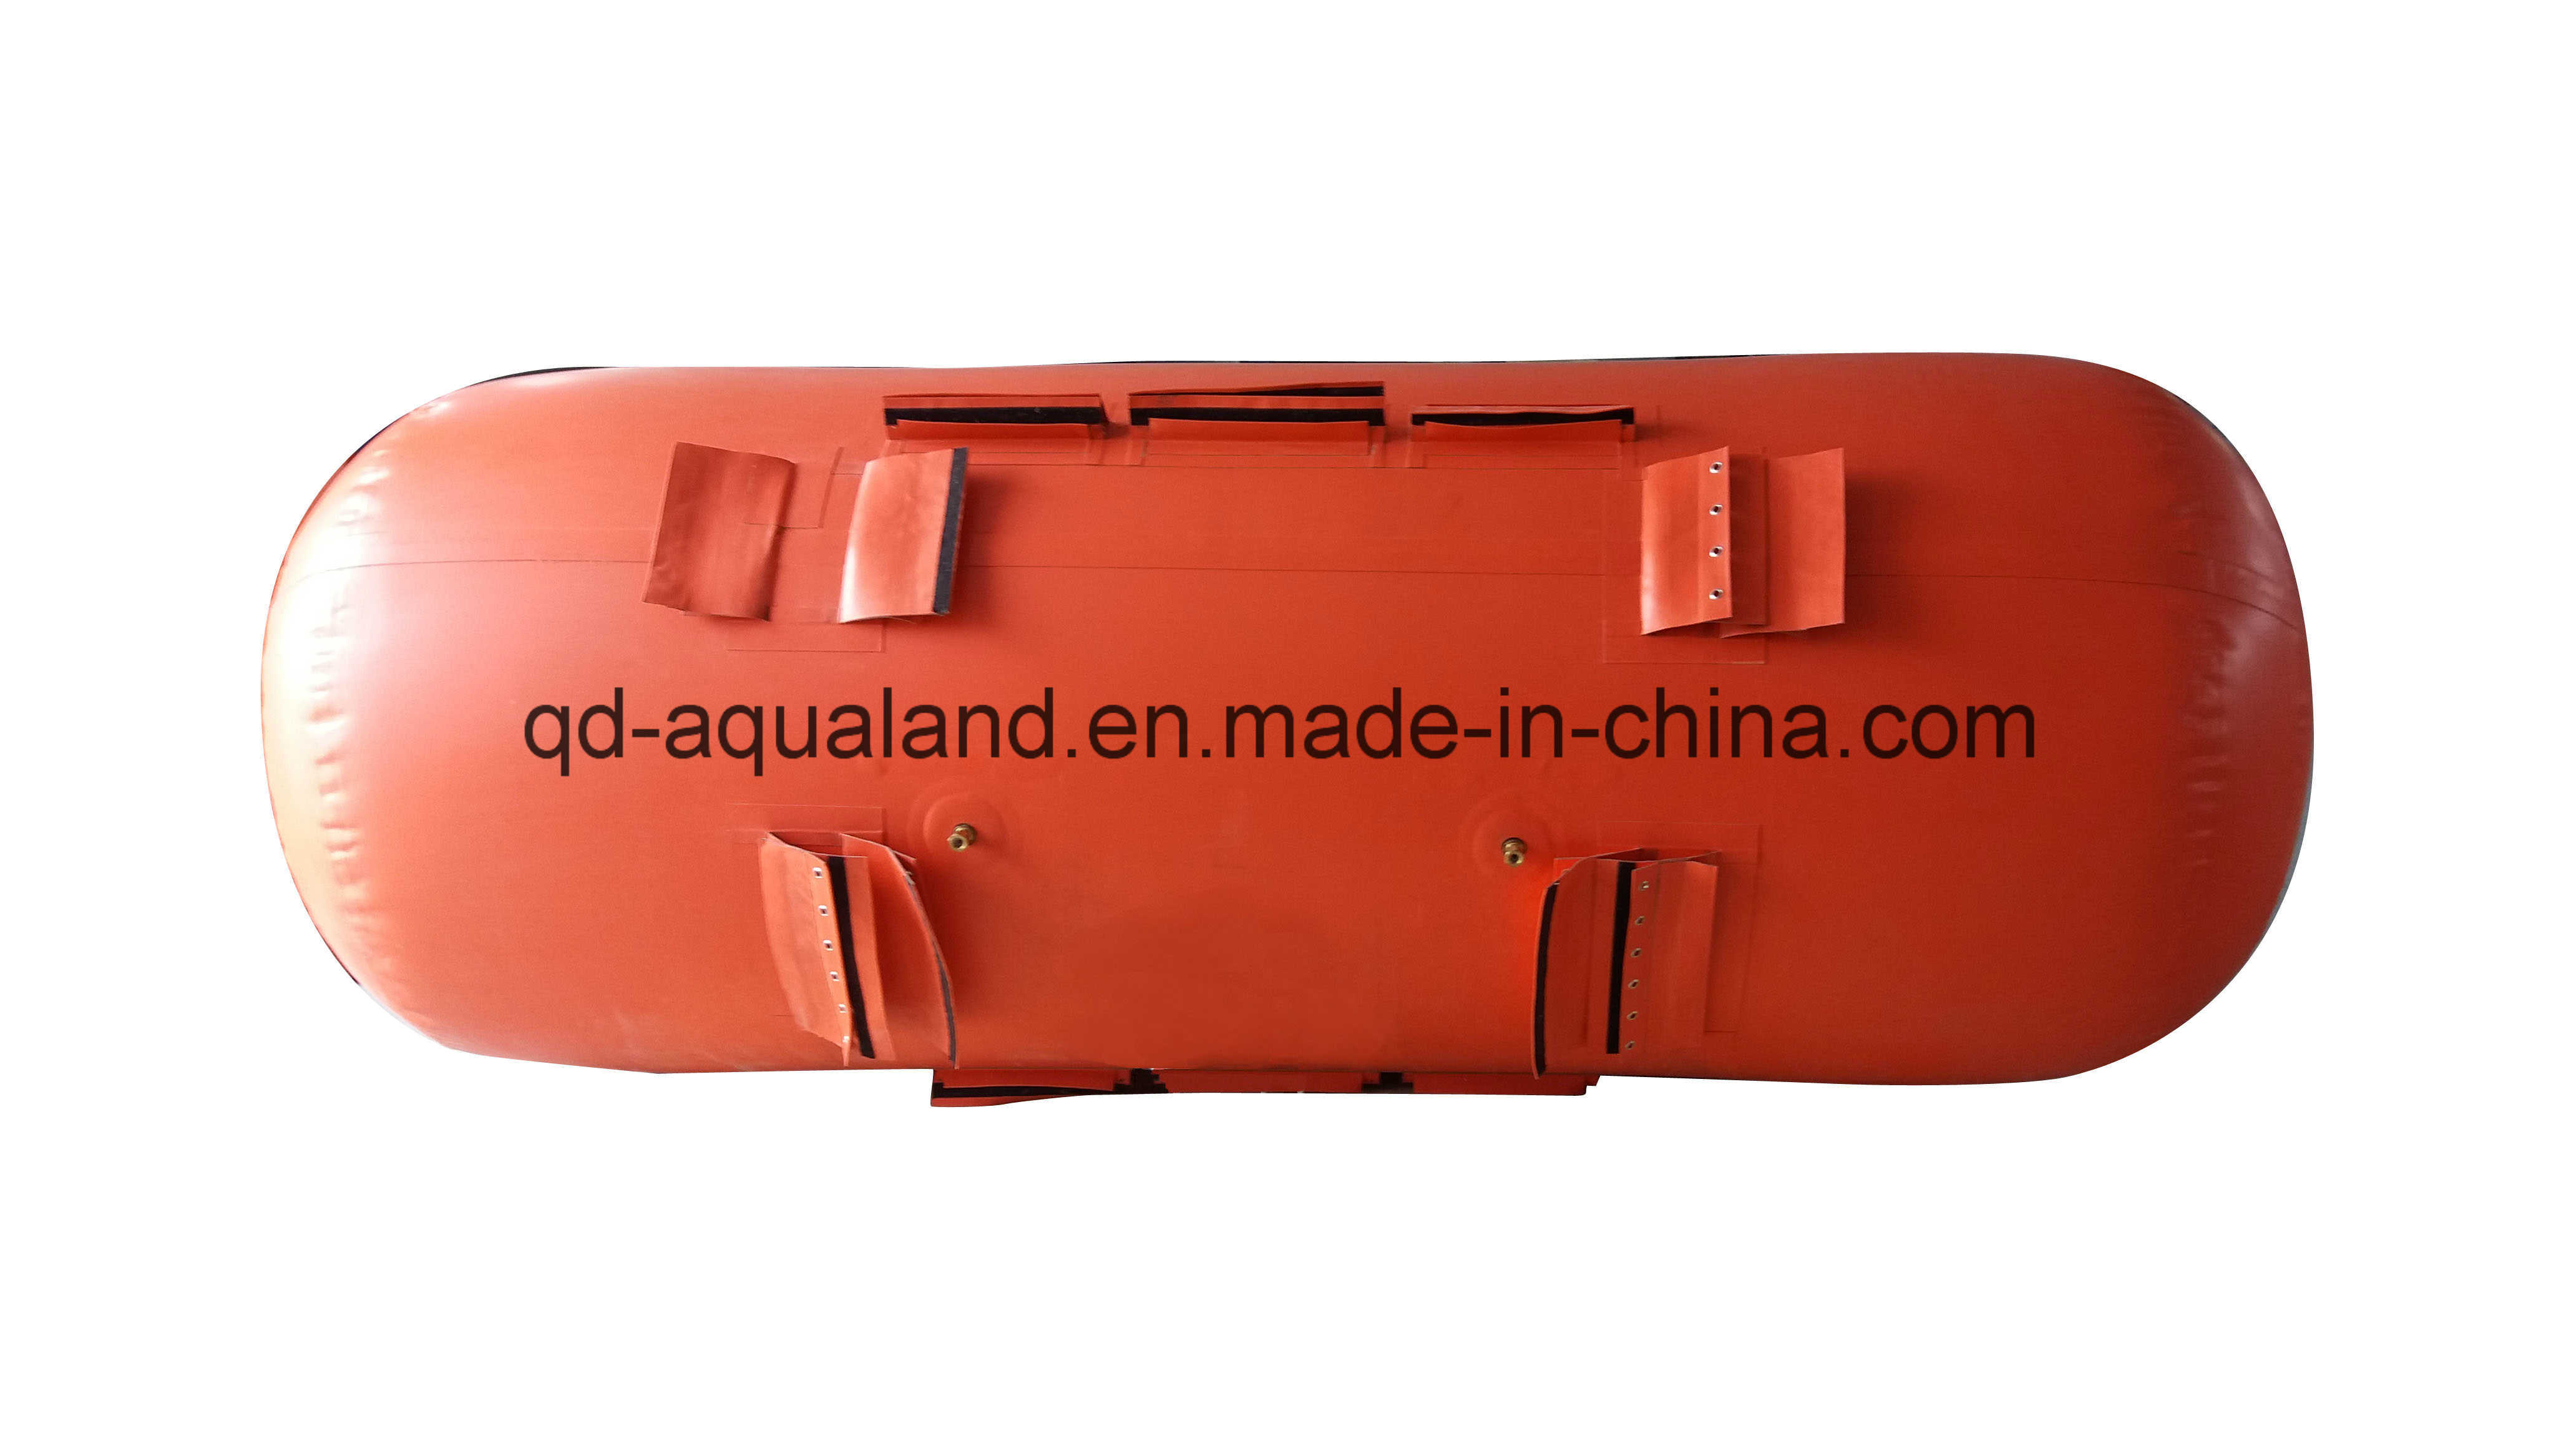 Aqualand Self-Righting System/Srb/Self-Righting Bags/Military Patrol Boat/Rescue Boat (sr-a)